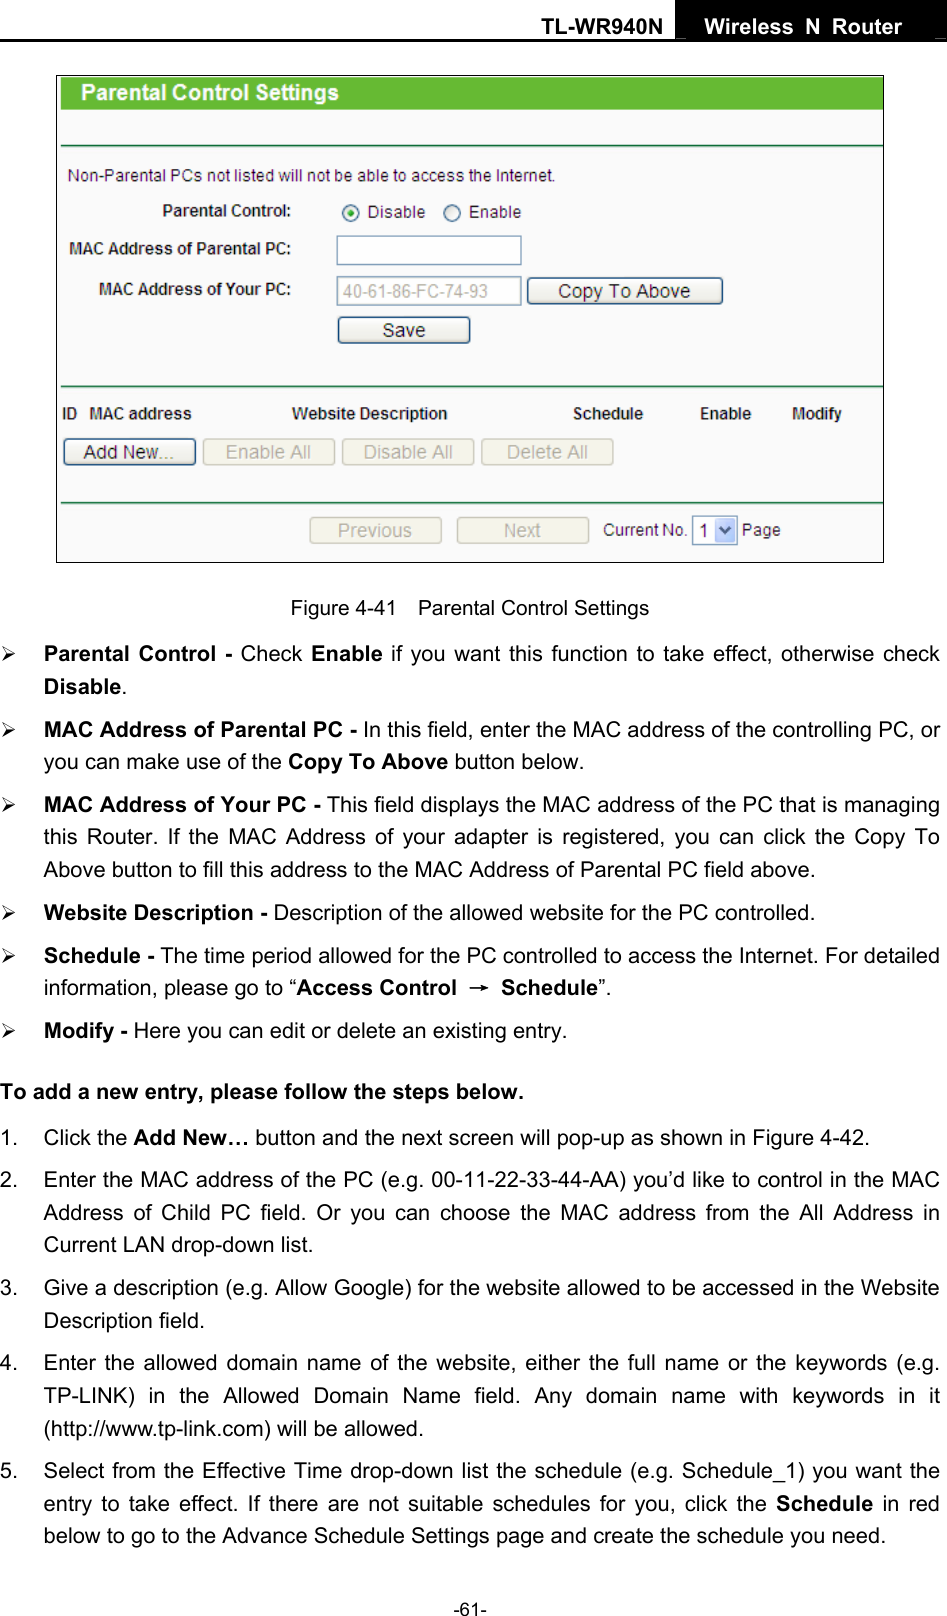 TL-WR940N  Wireless N Router    Figure 4-41    Parental Control Settings ¾ Parental Control - Check Enable if you want this function to take effect, otherwise check Disable.  ¾ MAC Address of Parental PC - In this field, enter the MAC address of the controlling PC, or you can make use of the Copy To Above button below.   ¾ MAC Address of Your PC - This field displays the MAC address of the PC that is managing this Router. If the MAC Address of your adapter is registered, you can click the Copy To Above button to fill this address to the MAC Address of Parental PC field above.   ¾ Website Description - Description of the allowed website for the PC controlled.   ¾ Schedule - The time period allowed for the PC controlled to access the Internet. For detailed information, please go to “Access Control  → Schedule”.  ¾ Modify - Here you can edit or delete an existing entry.   To add a new entry, please follow the steps below. 1. Click the Add New… button and the next screen will pop-up as shown in Figure 4-42. 2.  Enter the MAC address of the PC (e.g. 00-11-22-33-44-AA) you’d like to control in the MAC Address of Child PC field. Or you can choose the MAC address from the All Address in Current LAN drop-down list. 3.  Give a description (e.g. Allow Google) for the website allowed to be accessed in the Website Description field. 4.  Enter the allowed domain name of the website, either the full name or the keywords (e.g. TP-LINK) in the Allowed Domain Name field. Any domain name with keywords in it (http://www.tp-link.com) will be allowed. 5.  Select from the Effective Time drop-down list the schedule (e.g. Schedule_1) you want the entry to take effect. If there are not suitable schedules for you, click the Schedule  in red below to go to the Advance Schedule Settings page and create the schedule you need. -61- 